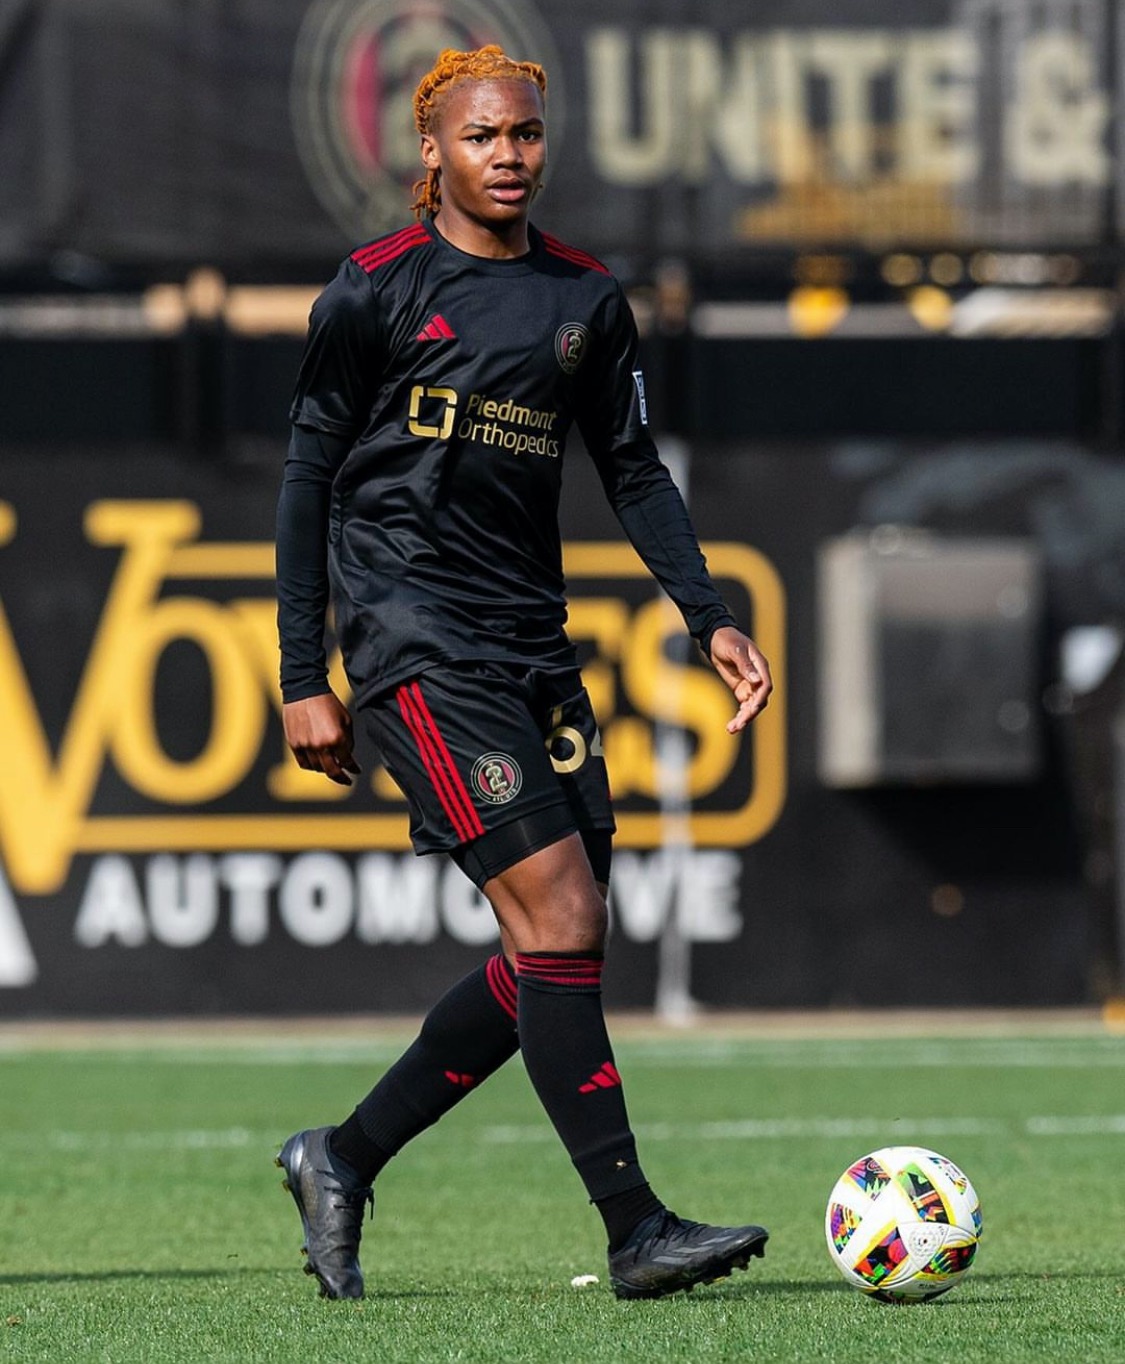 Senior Miles Hadley has been playing for Atlanta United 2, and played his first high school soccer season for the Knights this year. Hadley will be attending West Point USMA. (Courtesy of Miles Hadley)